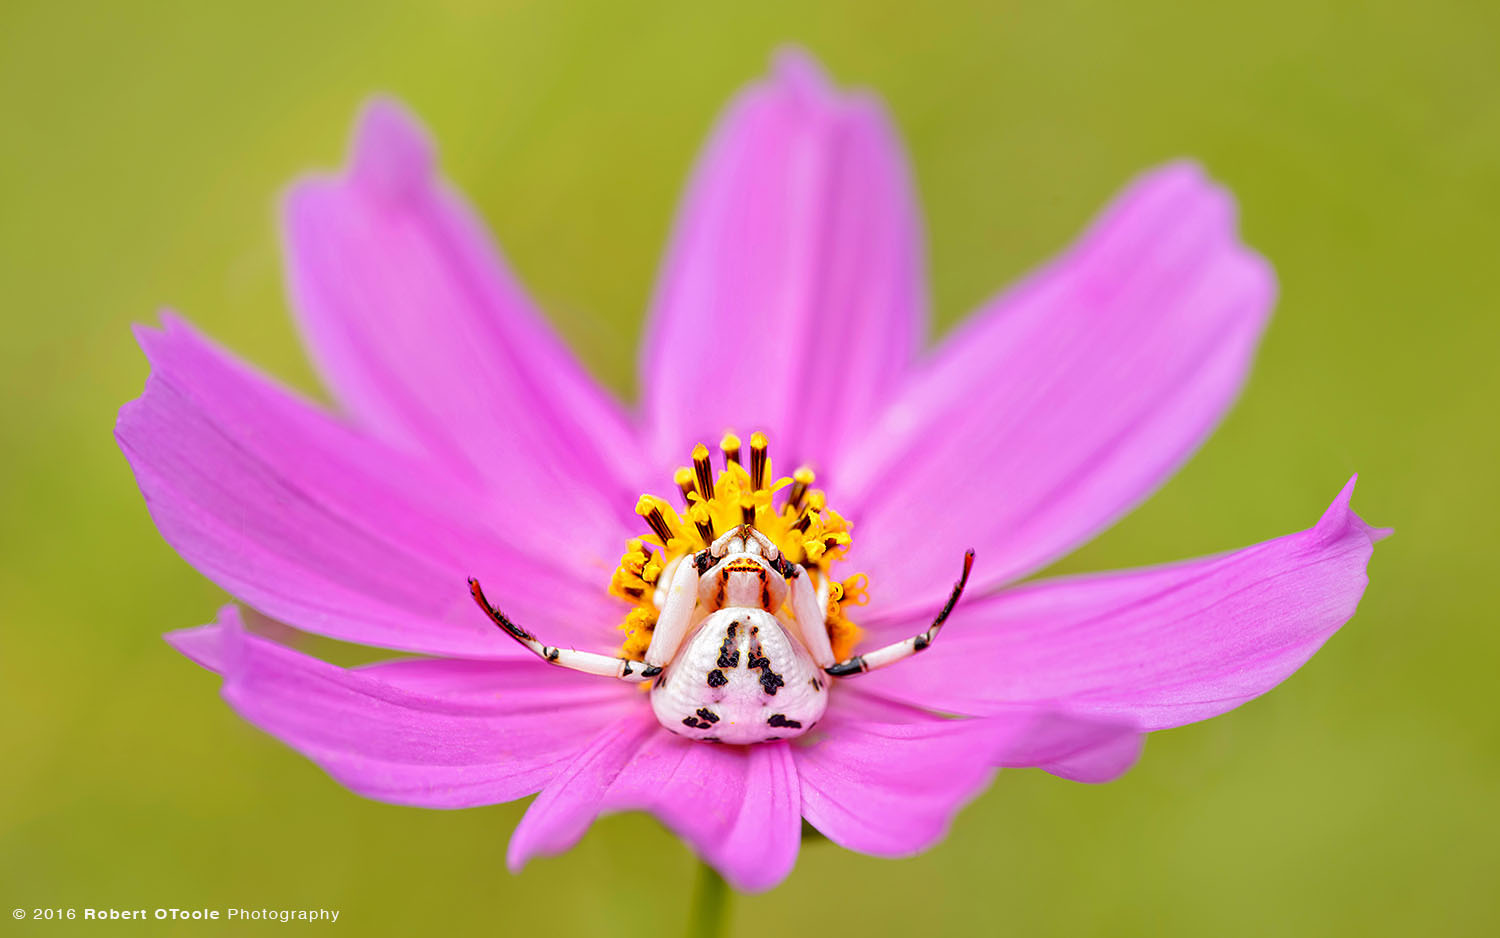 White Spider Crab on Pink Cosmos 